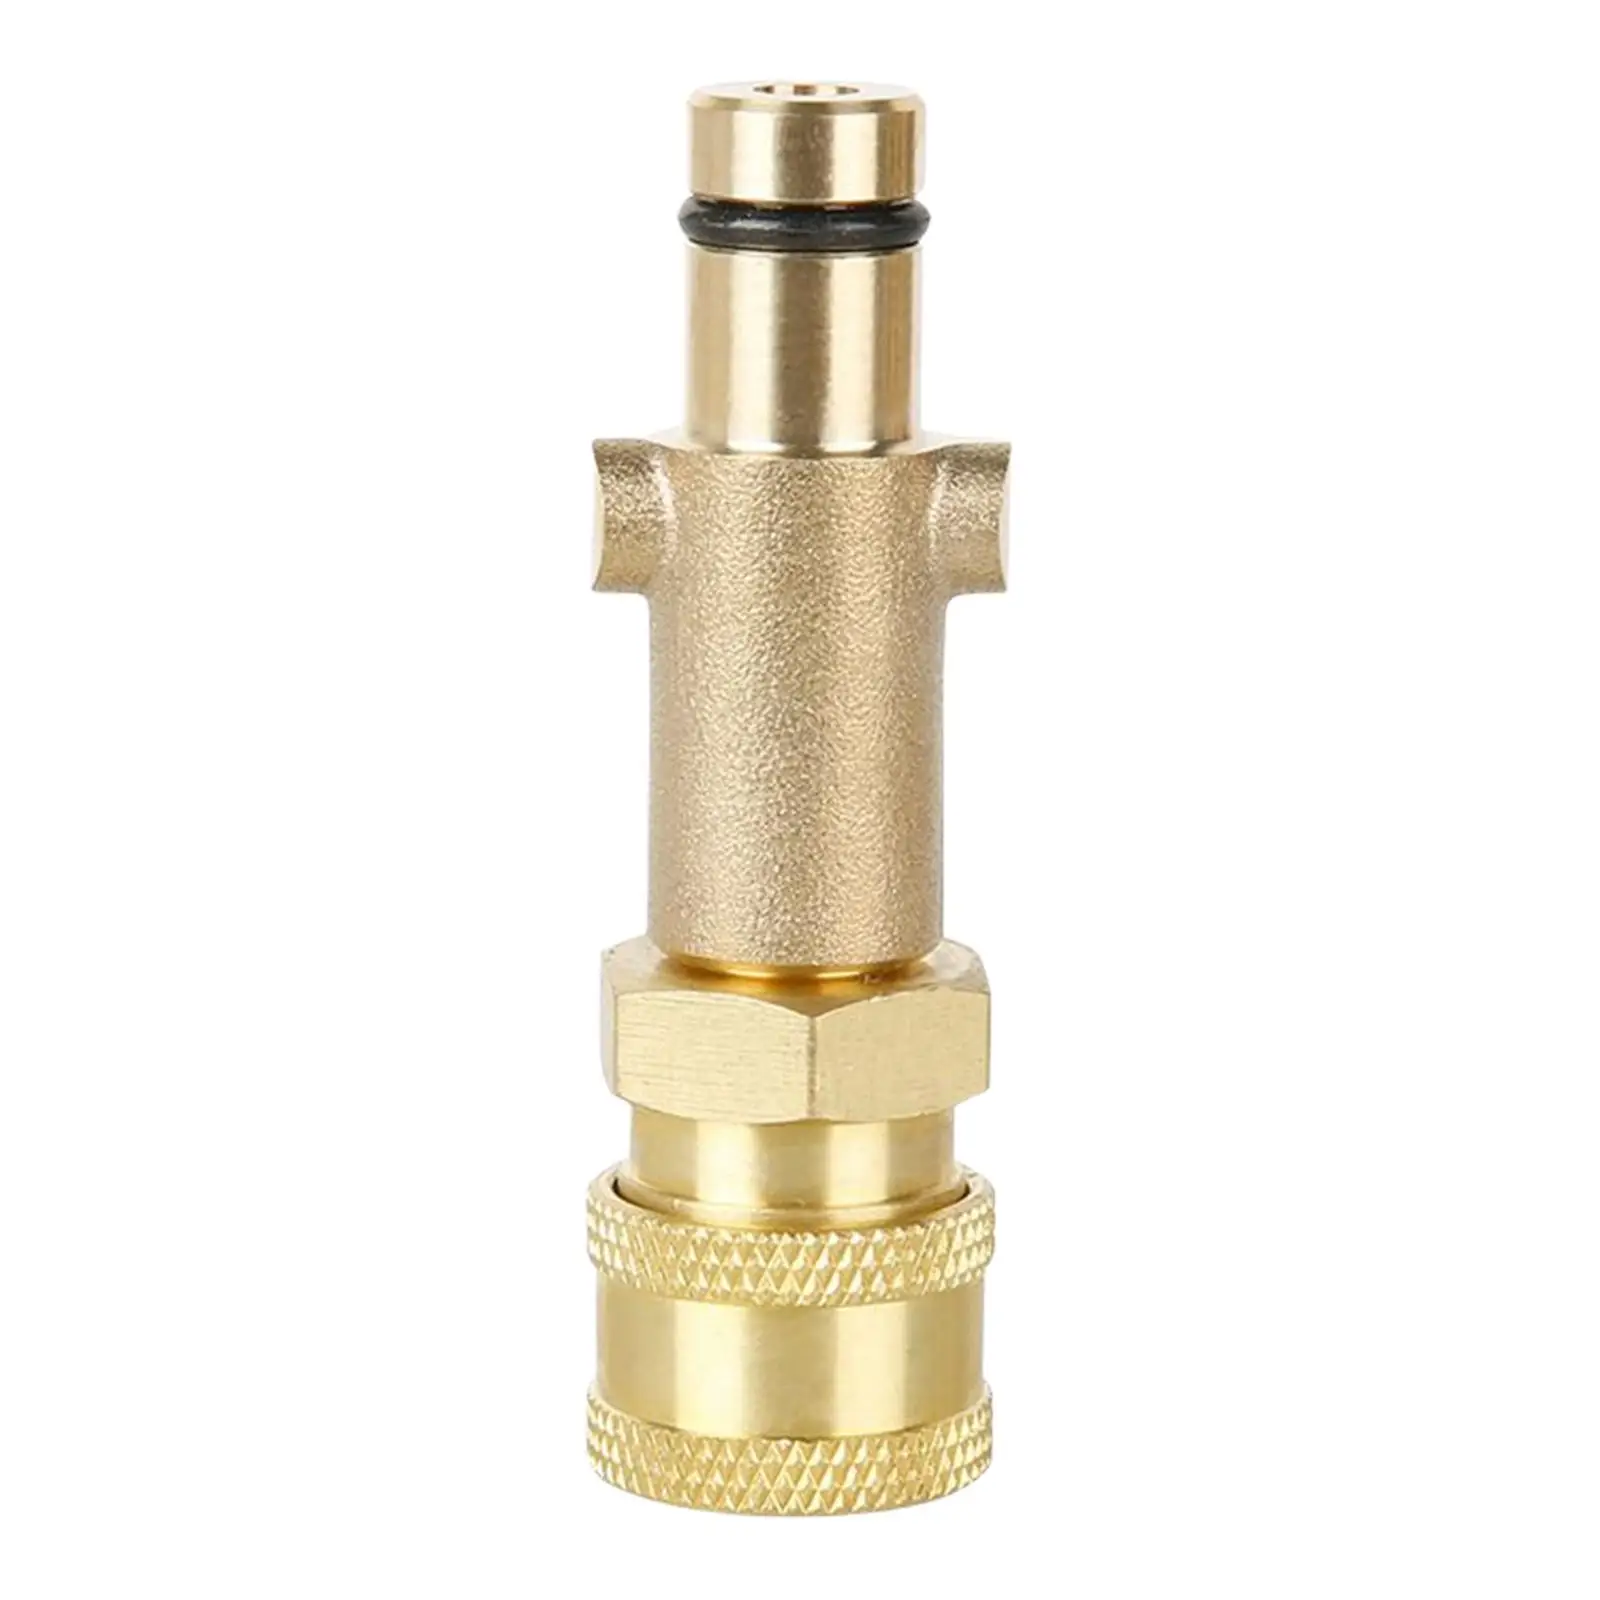 Brass Pressure Washer Quick Connector Adapter for Stihle Washer Machine Clean